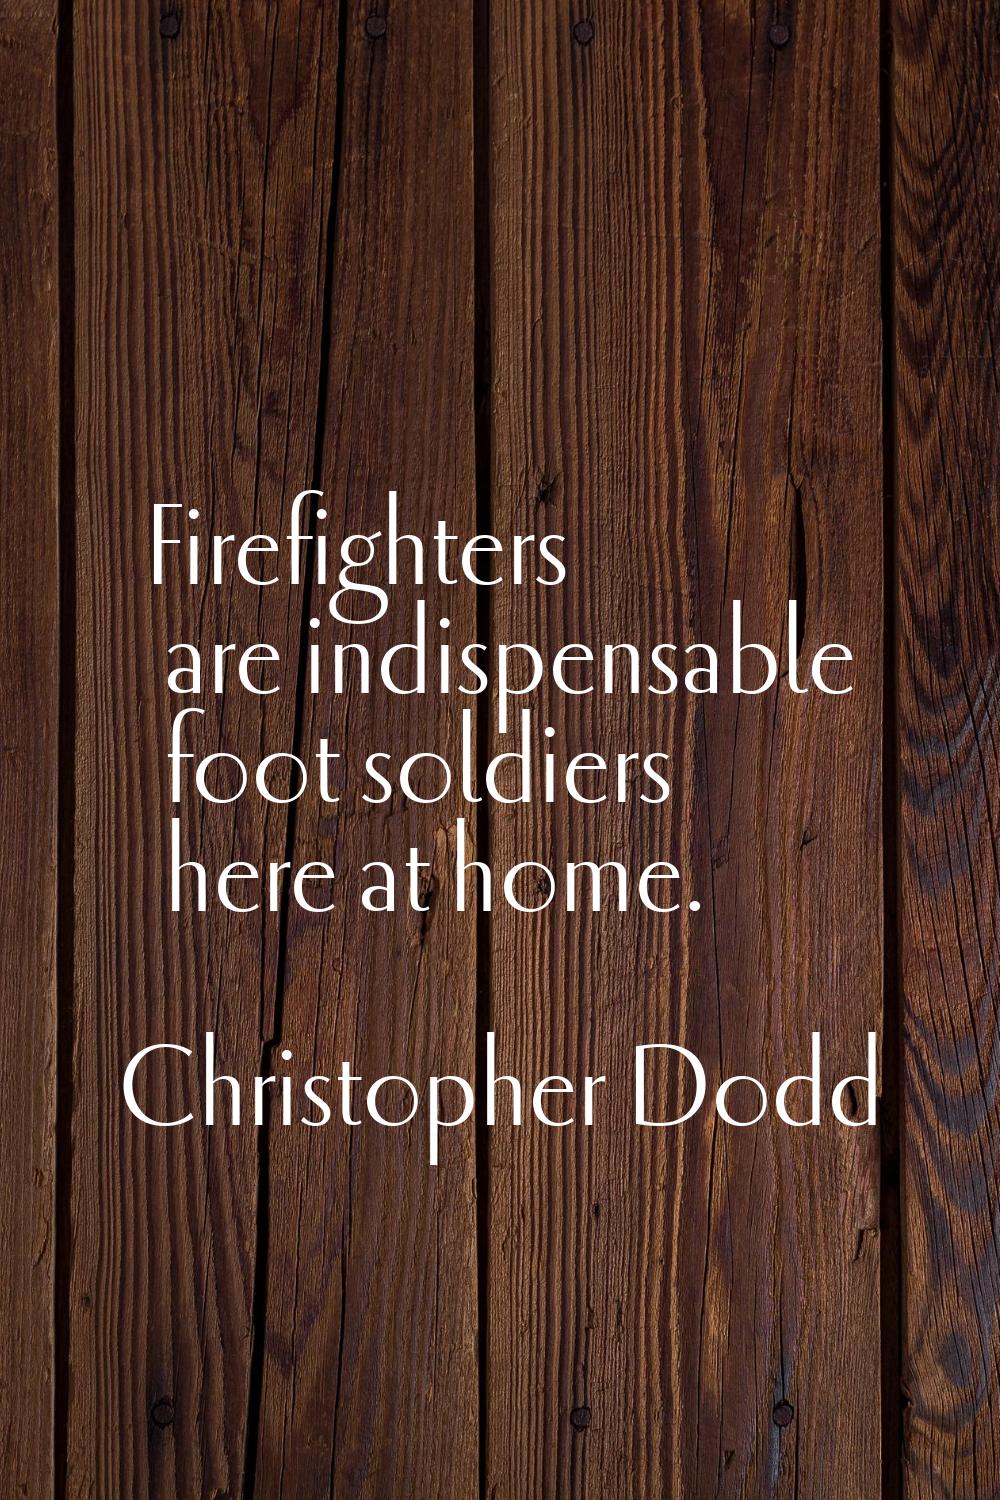 Firefighters are indispensable foot soldiers here at home.